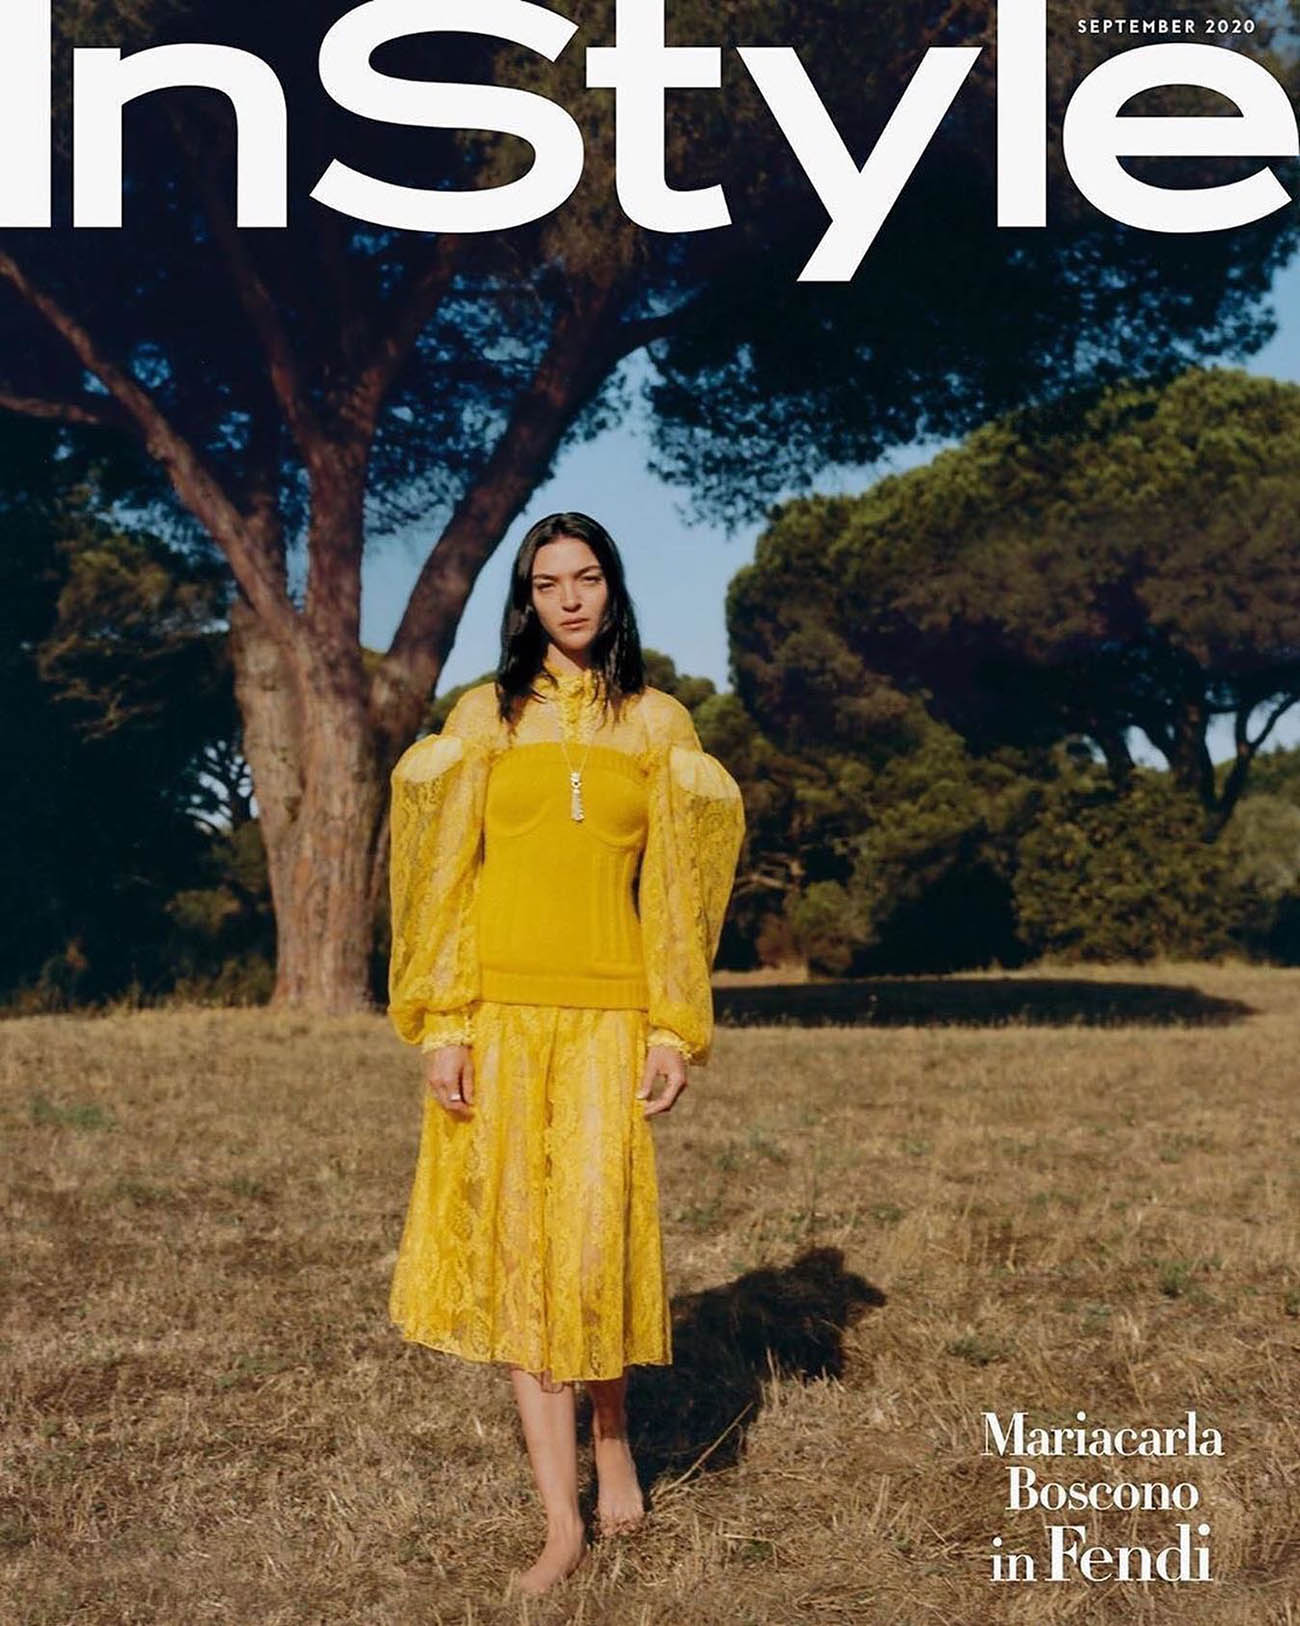 Mariacarla Boscono covers InStyle US September 2020 Digital Edition by Paolo Zerbini